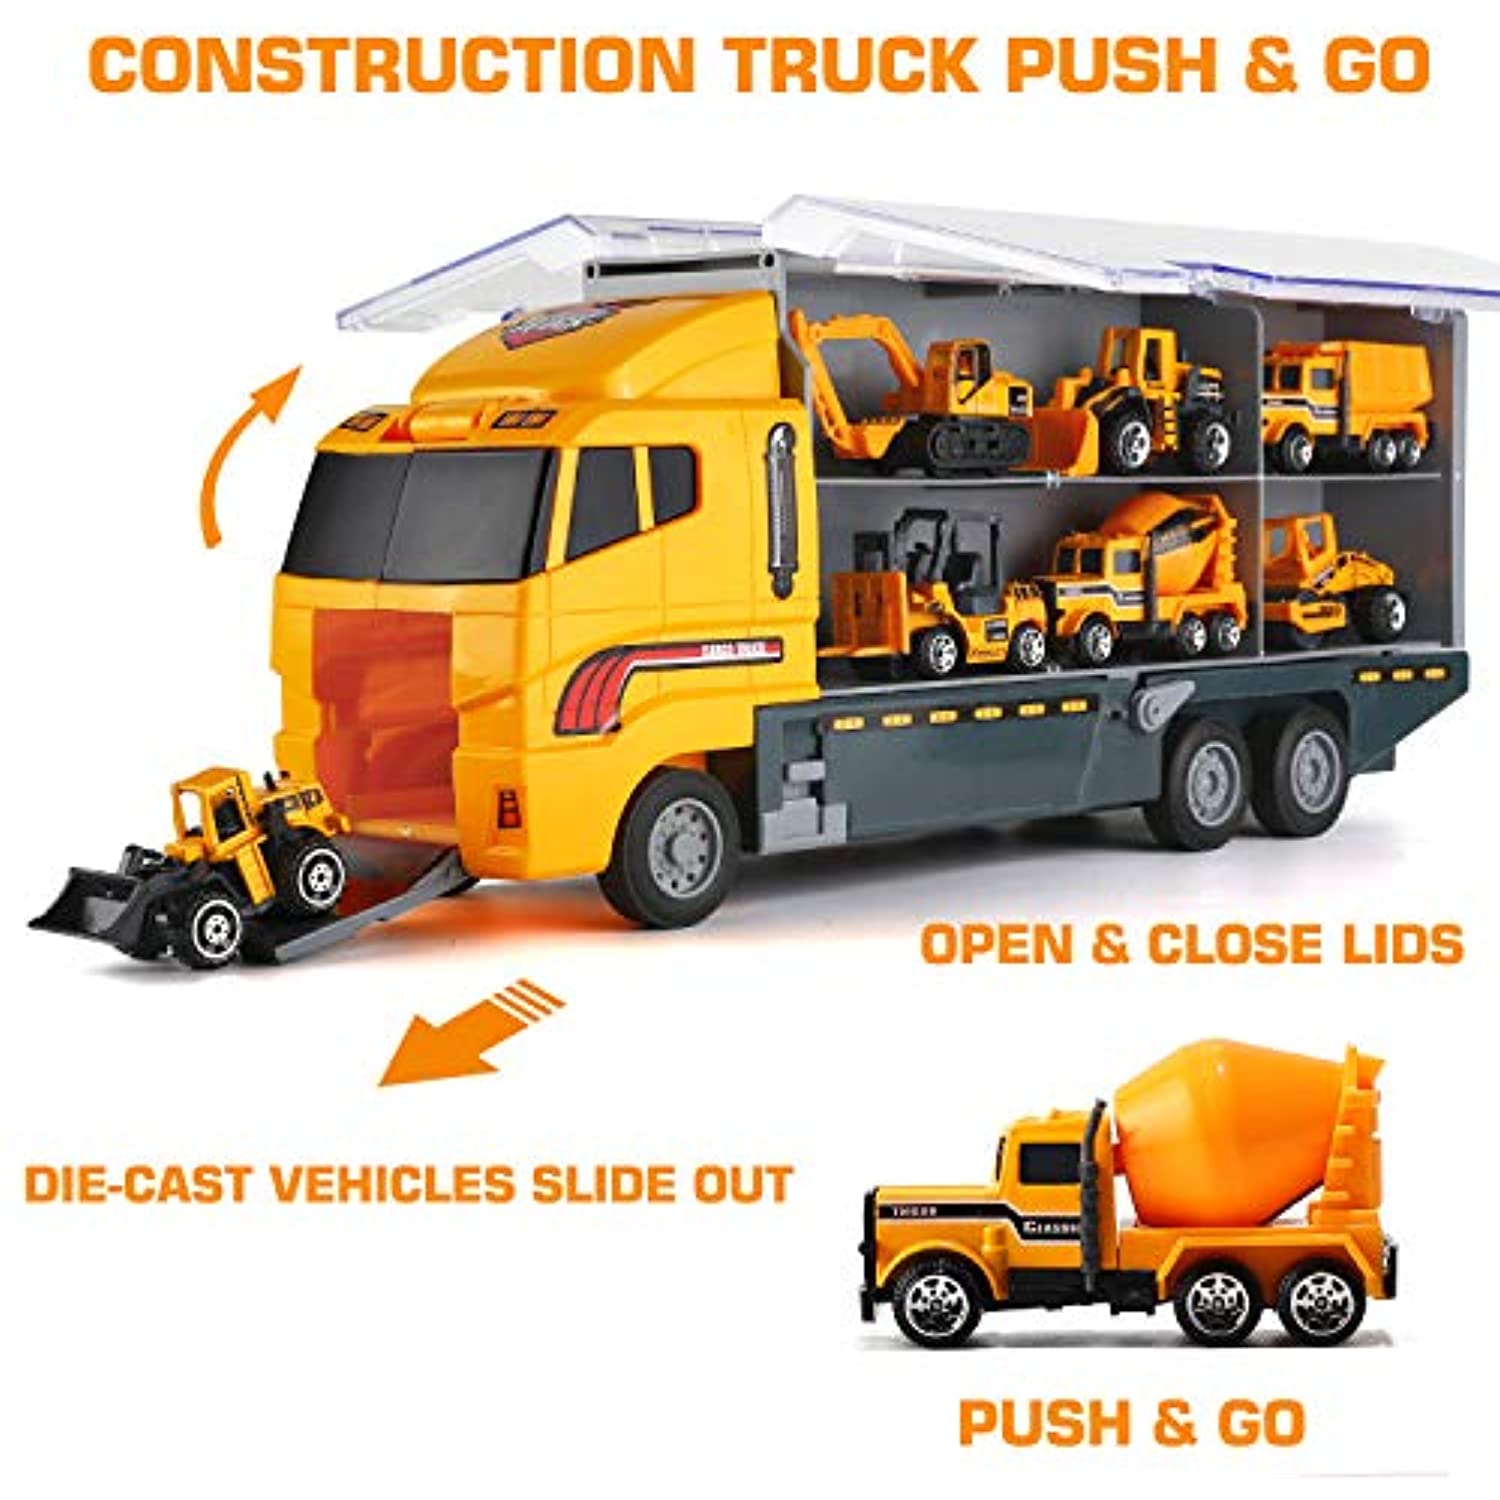 19 in 1 Construction Truck with Engineering Worker Toy Set, Mini Die-Cast Engine Car in Carrier Truck, Double Side Transport Vehicle Play for Child Kid Boy Girl Birthday Christmas Party Favors - image 5 of 7